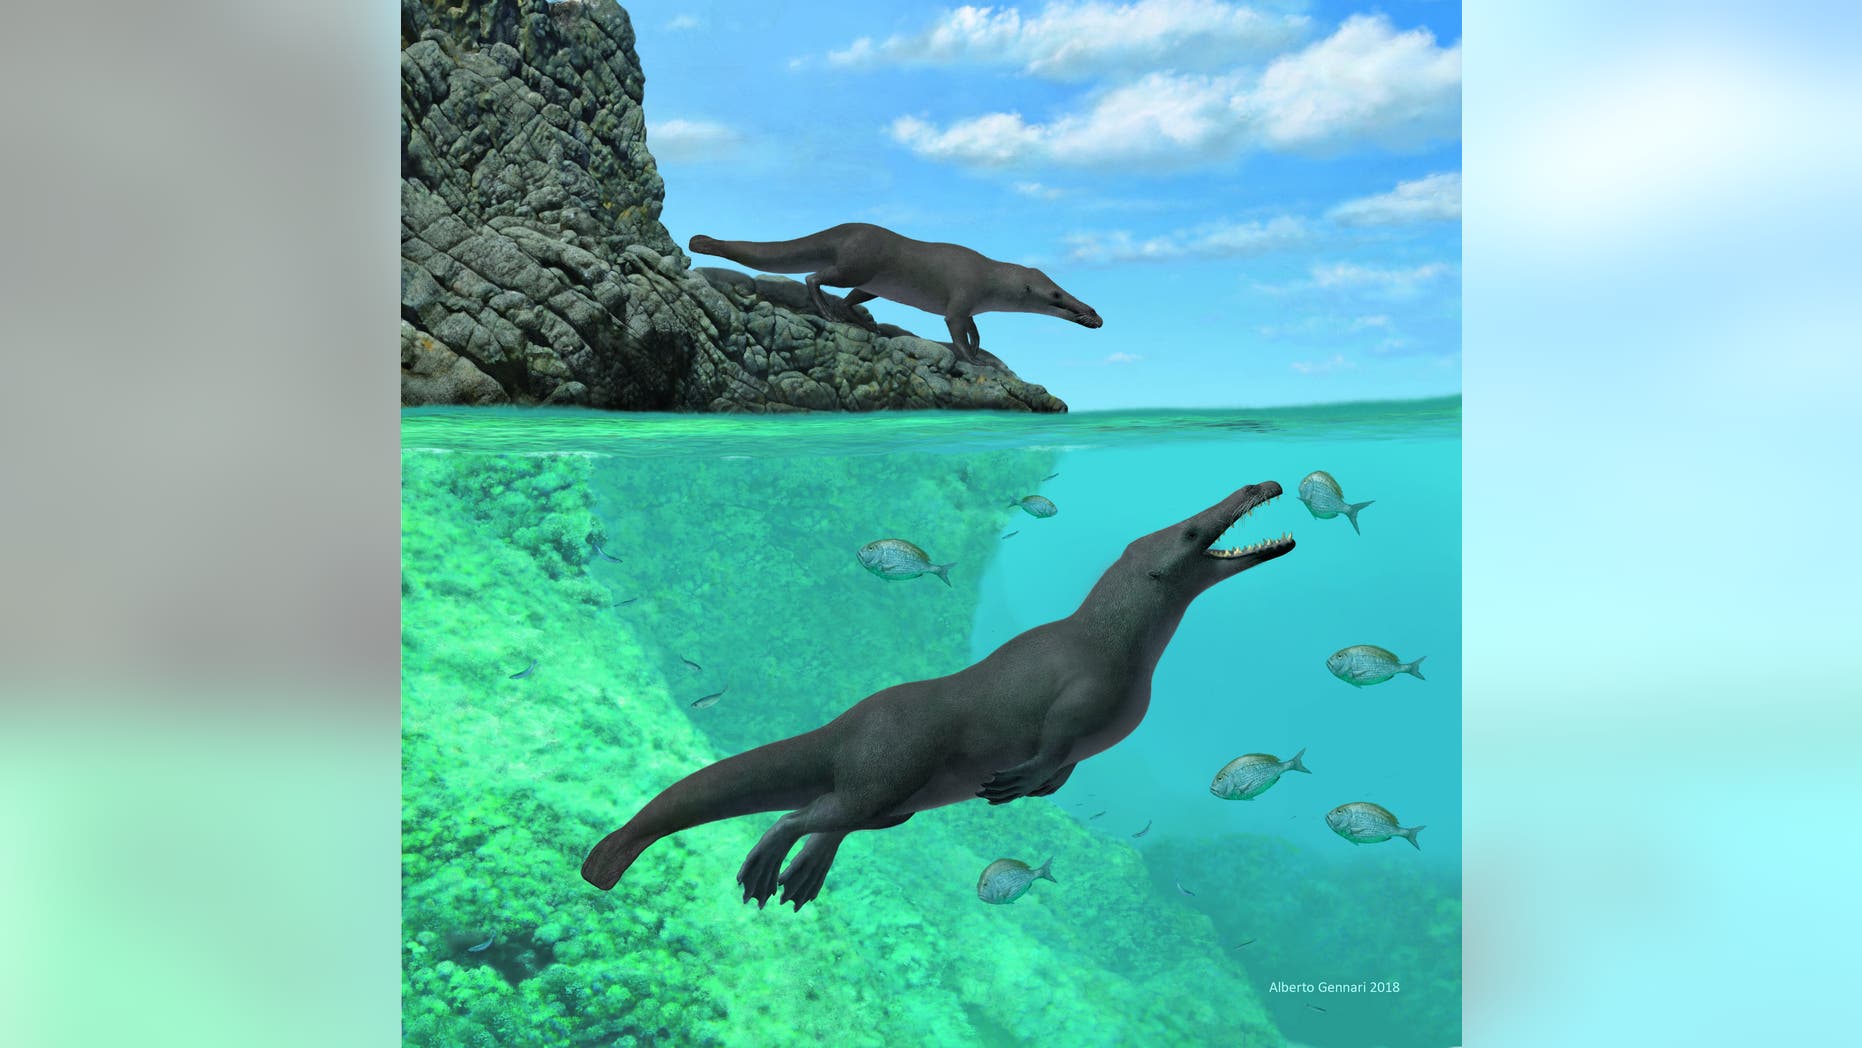 This illustration shows an artistic reconstruction of two individuals from Peregocetus, one standing along the rocky coast of Peru and the other attacking a sparidian fish. The presence of a tail shot remains hypothetical. Credit: A. Gennari